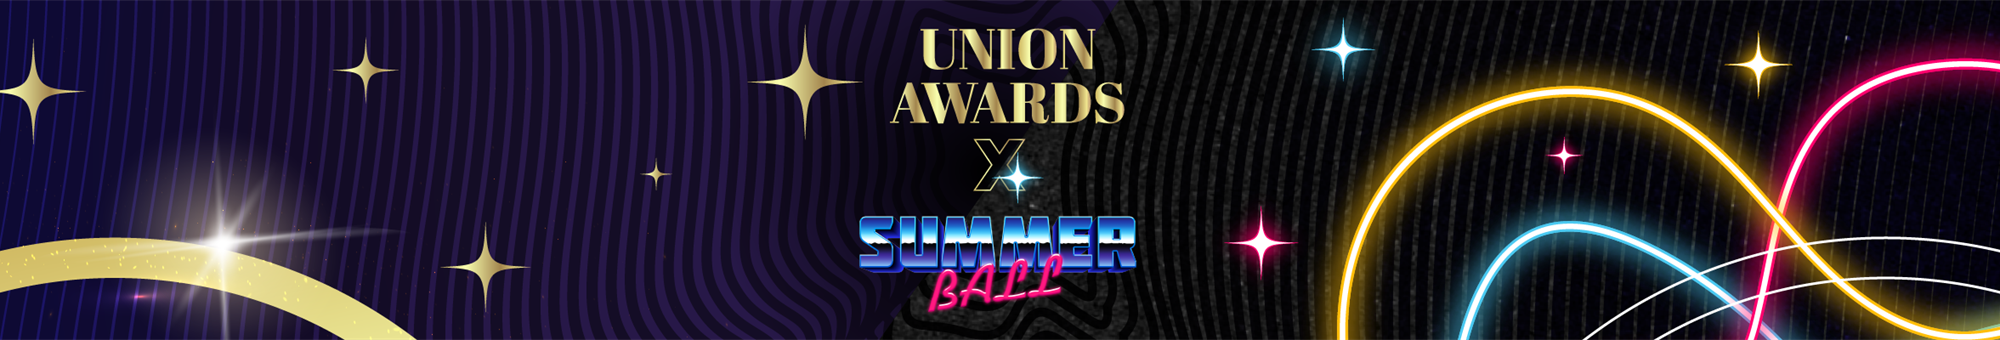 Our Union Awards celebrates and offers recognition of achievements made throughout the year.